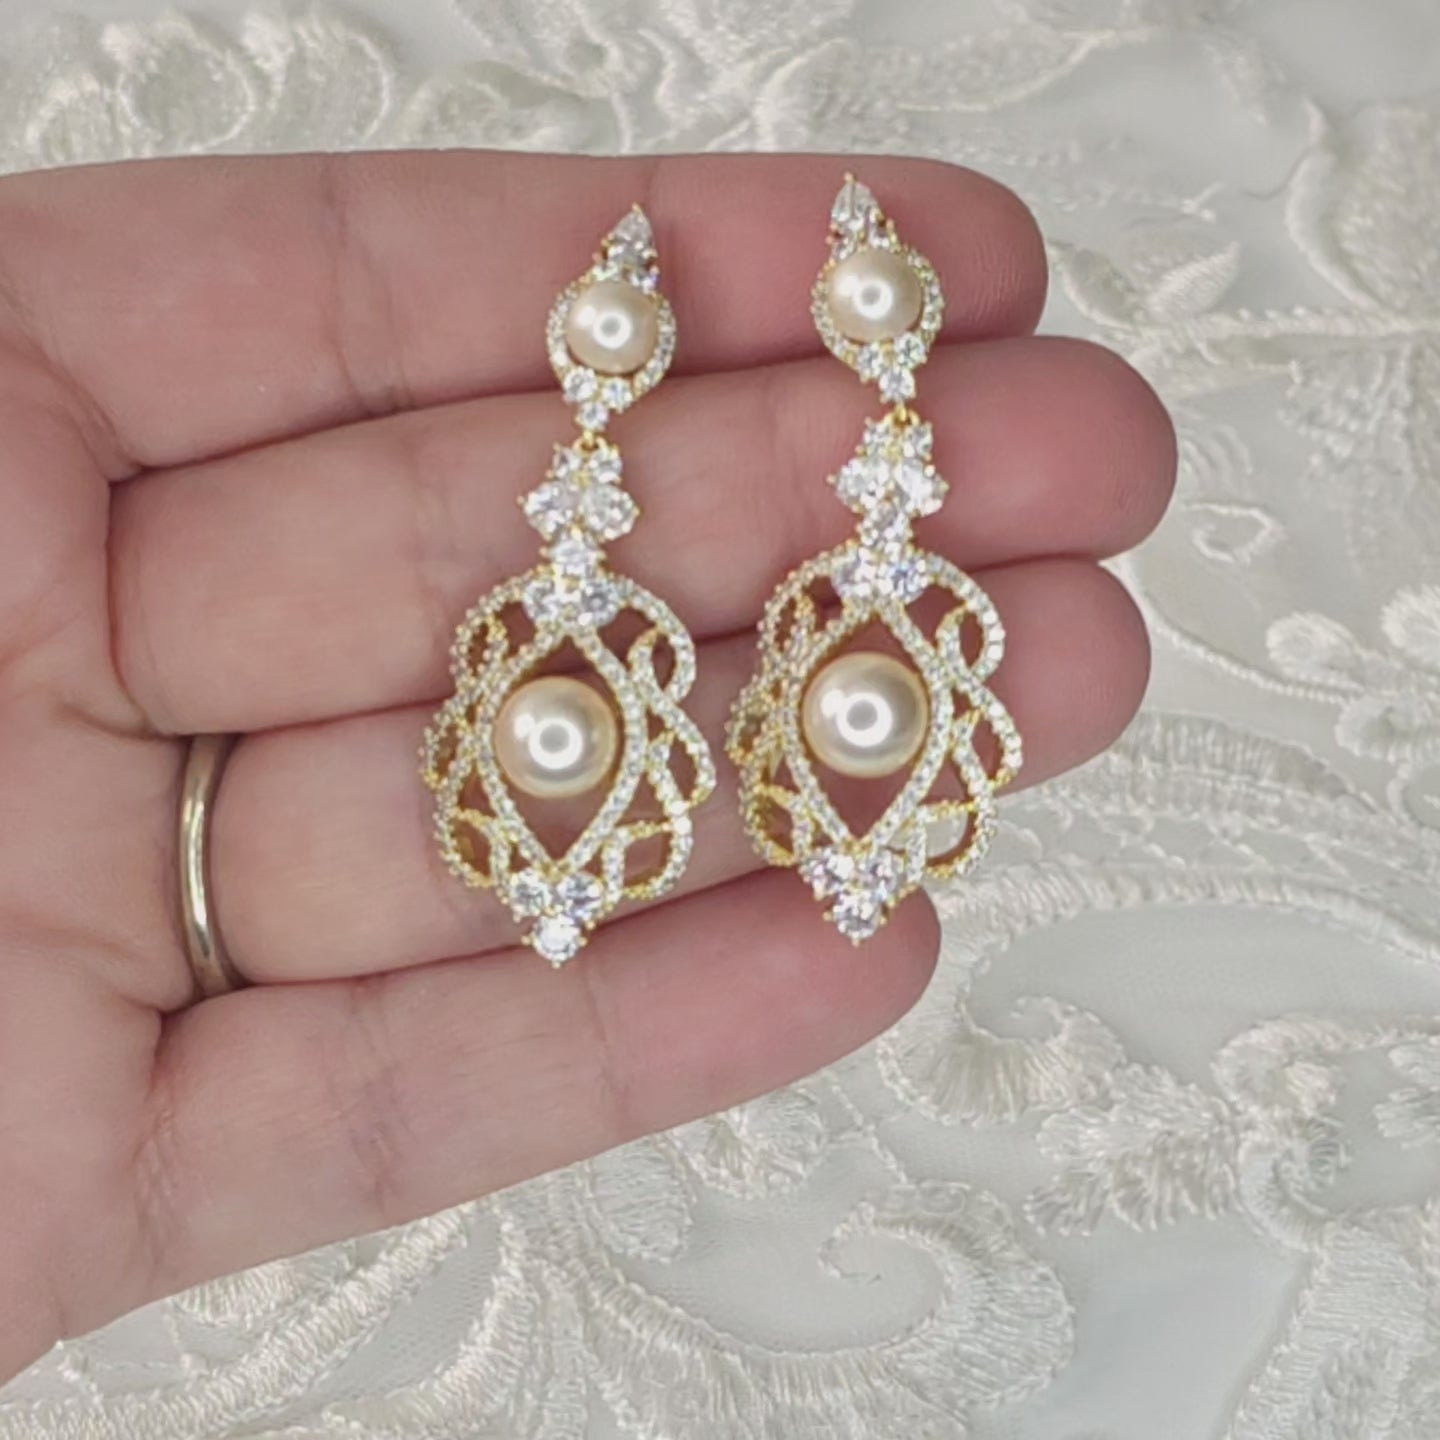 CZ Bridal Art Deco Earrings with Pearls